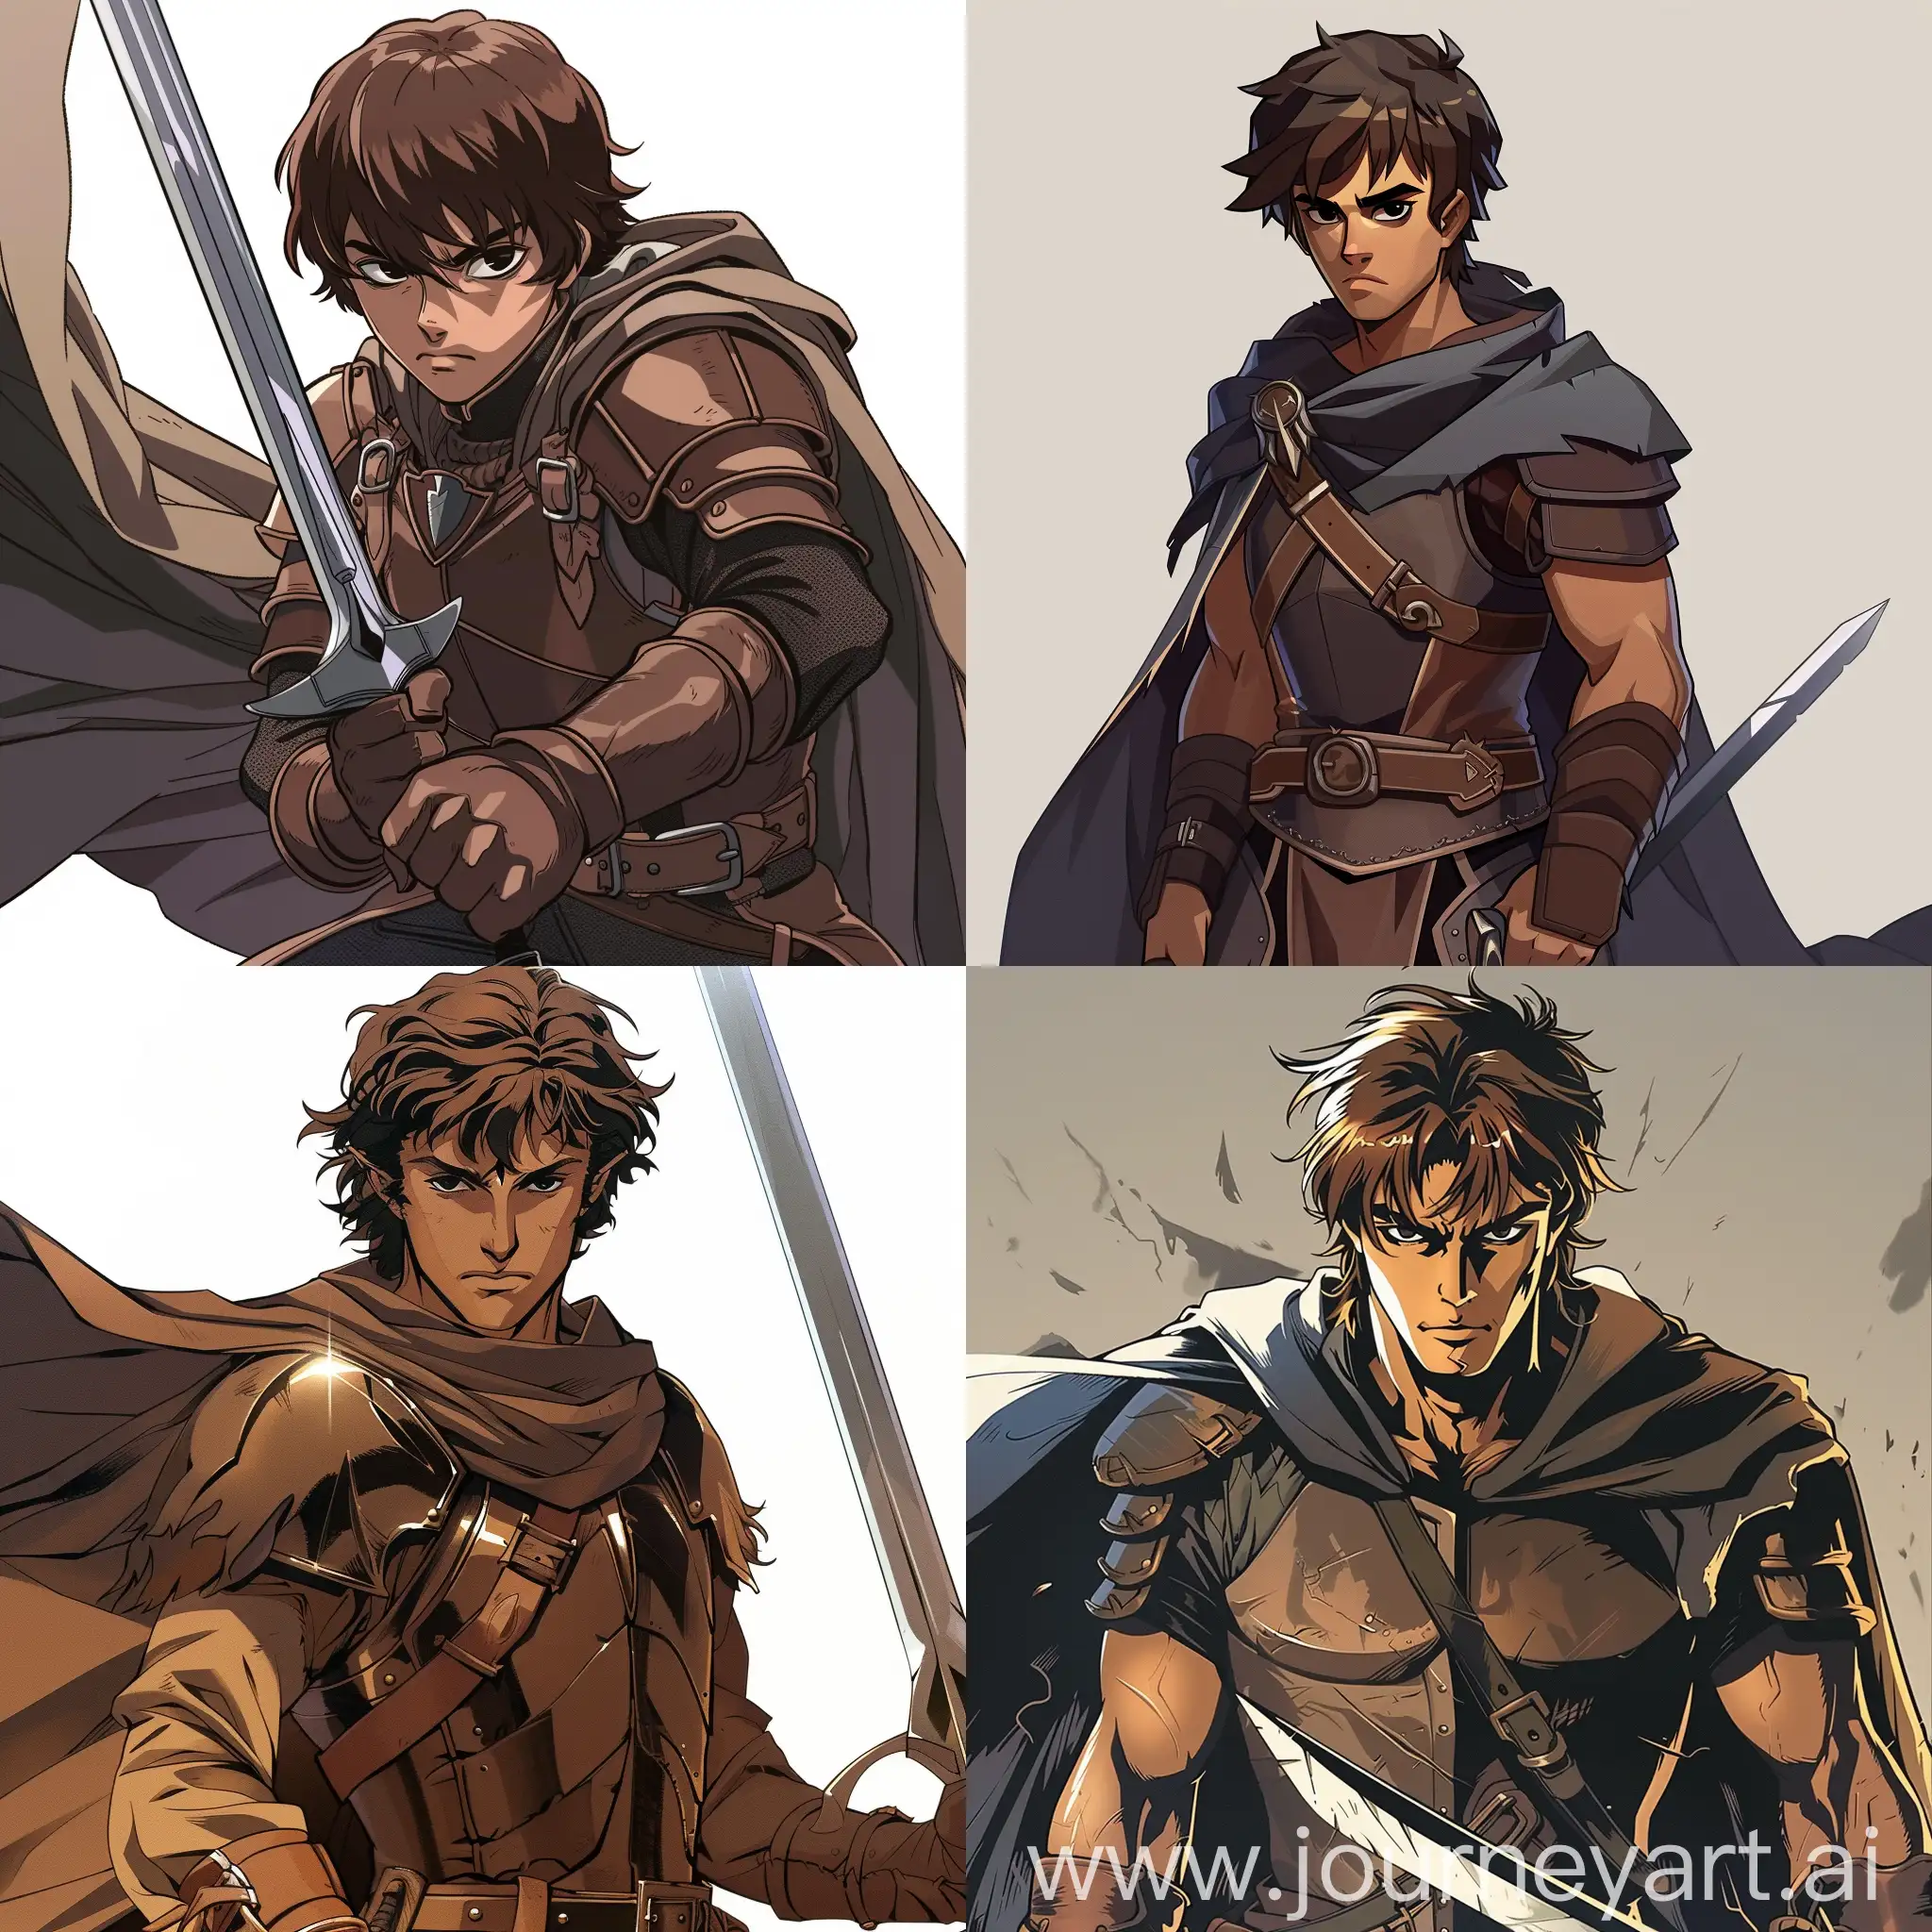 a duel sword wielder,a brown haired human,black colored eyes,good jawline.Wearing a leather armor and a cape